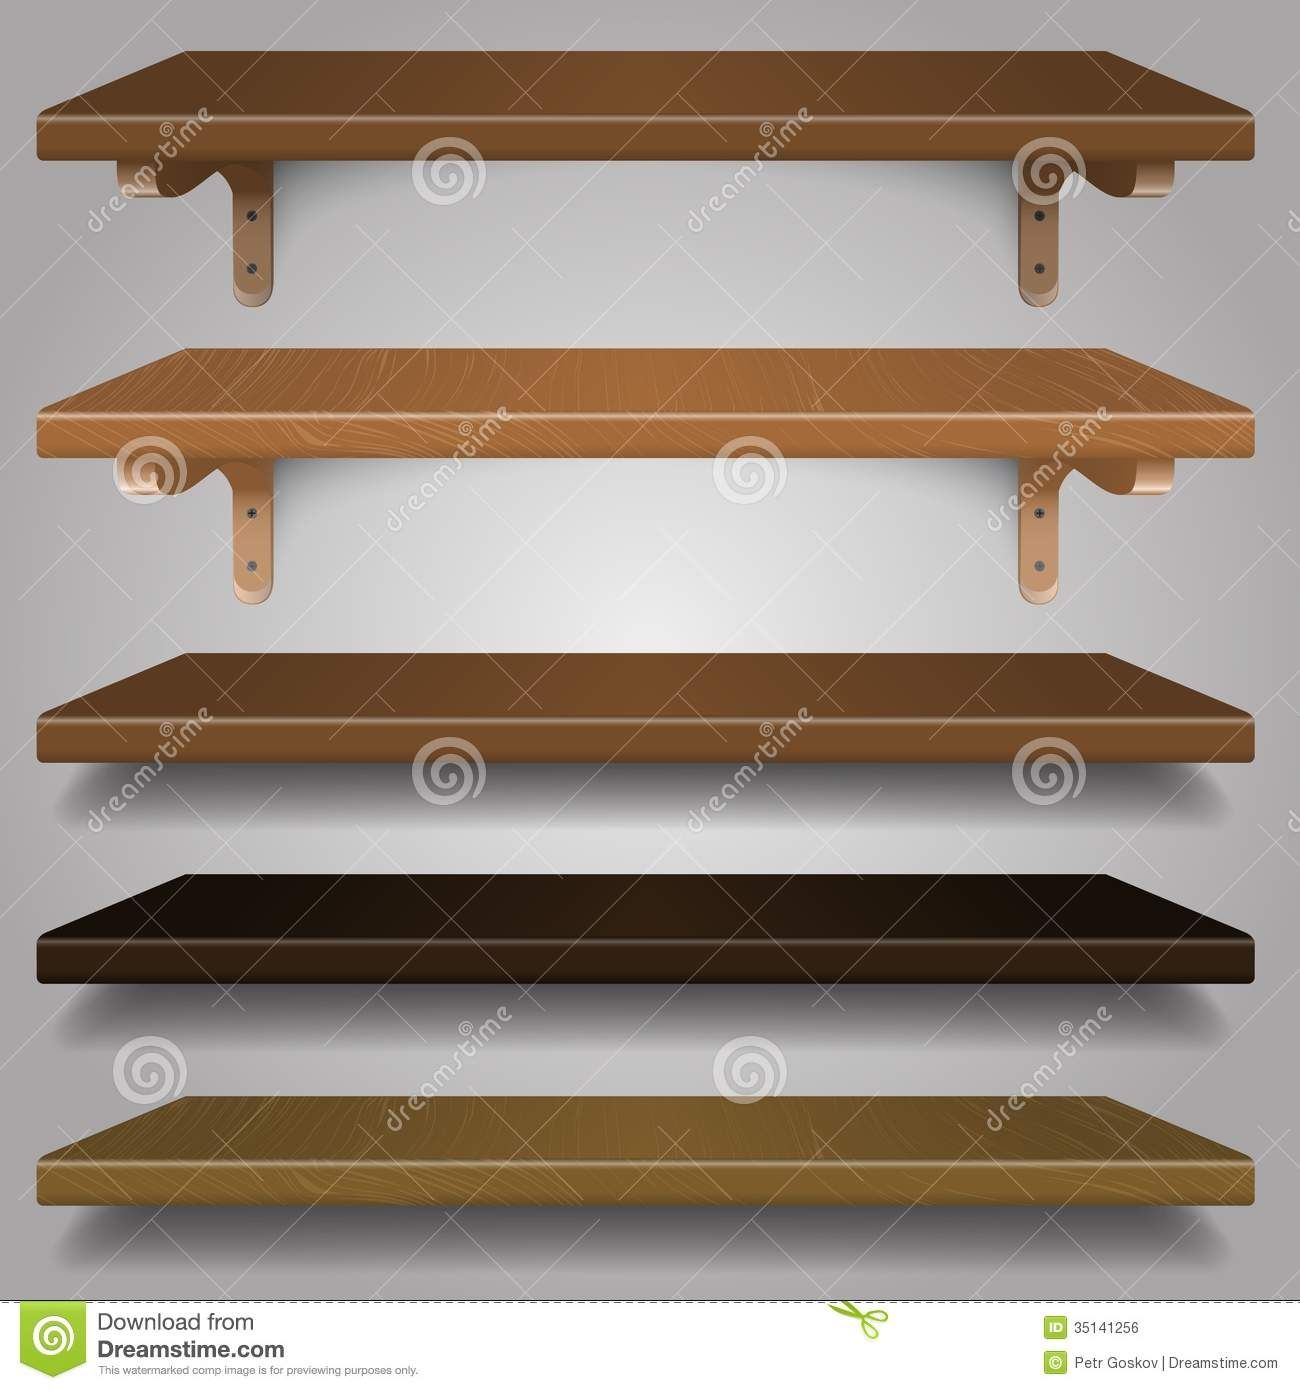 Inspiration about Vector Wood Shelves Royalty Free Stock Image Image 35141256 Inside Wood For Shelves (#5 of 15)